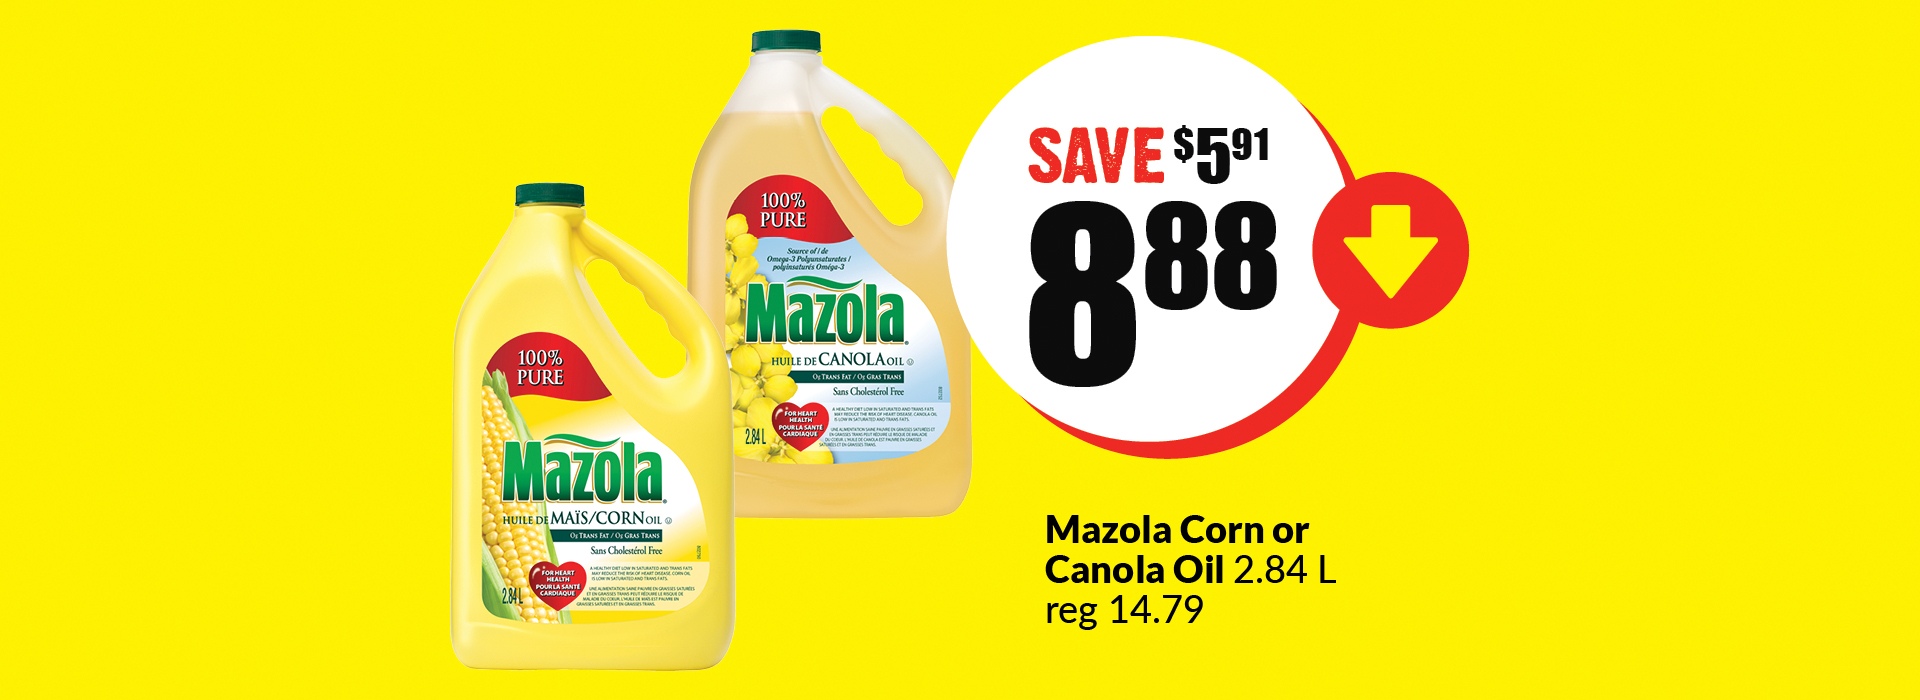 The following image contains the text, "Mazola corn or canola oil 2.84 L reg 14.79. Get them at $8.88 and save $5.91."